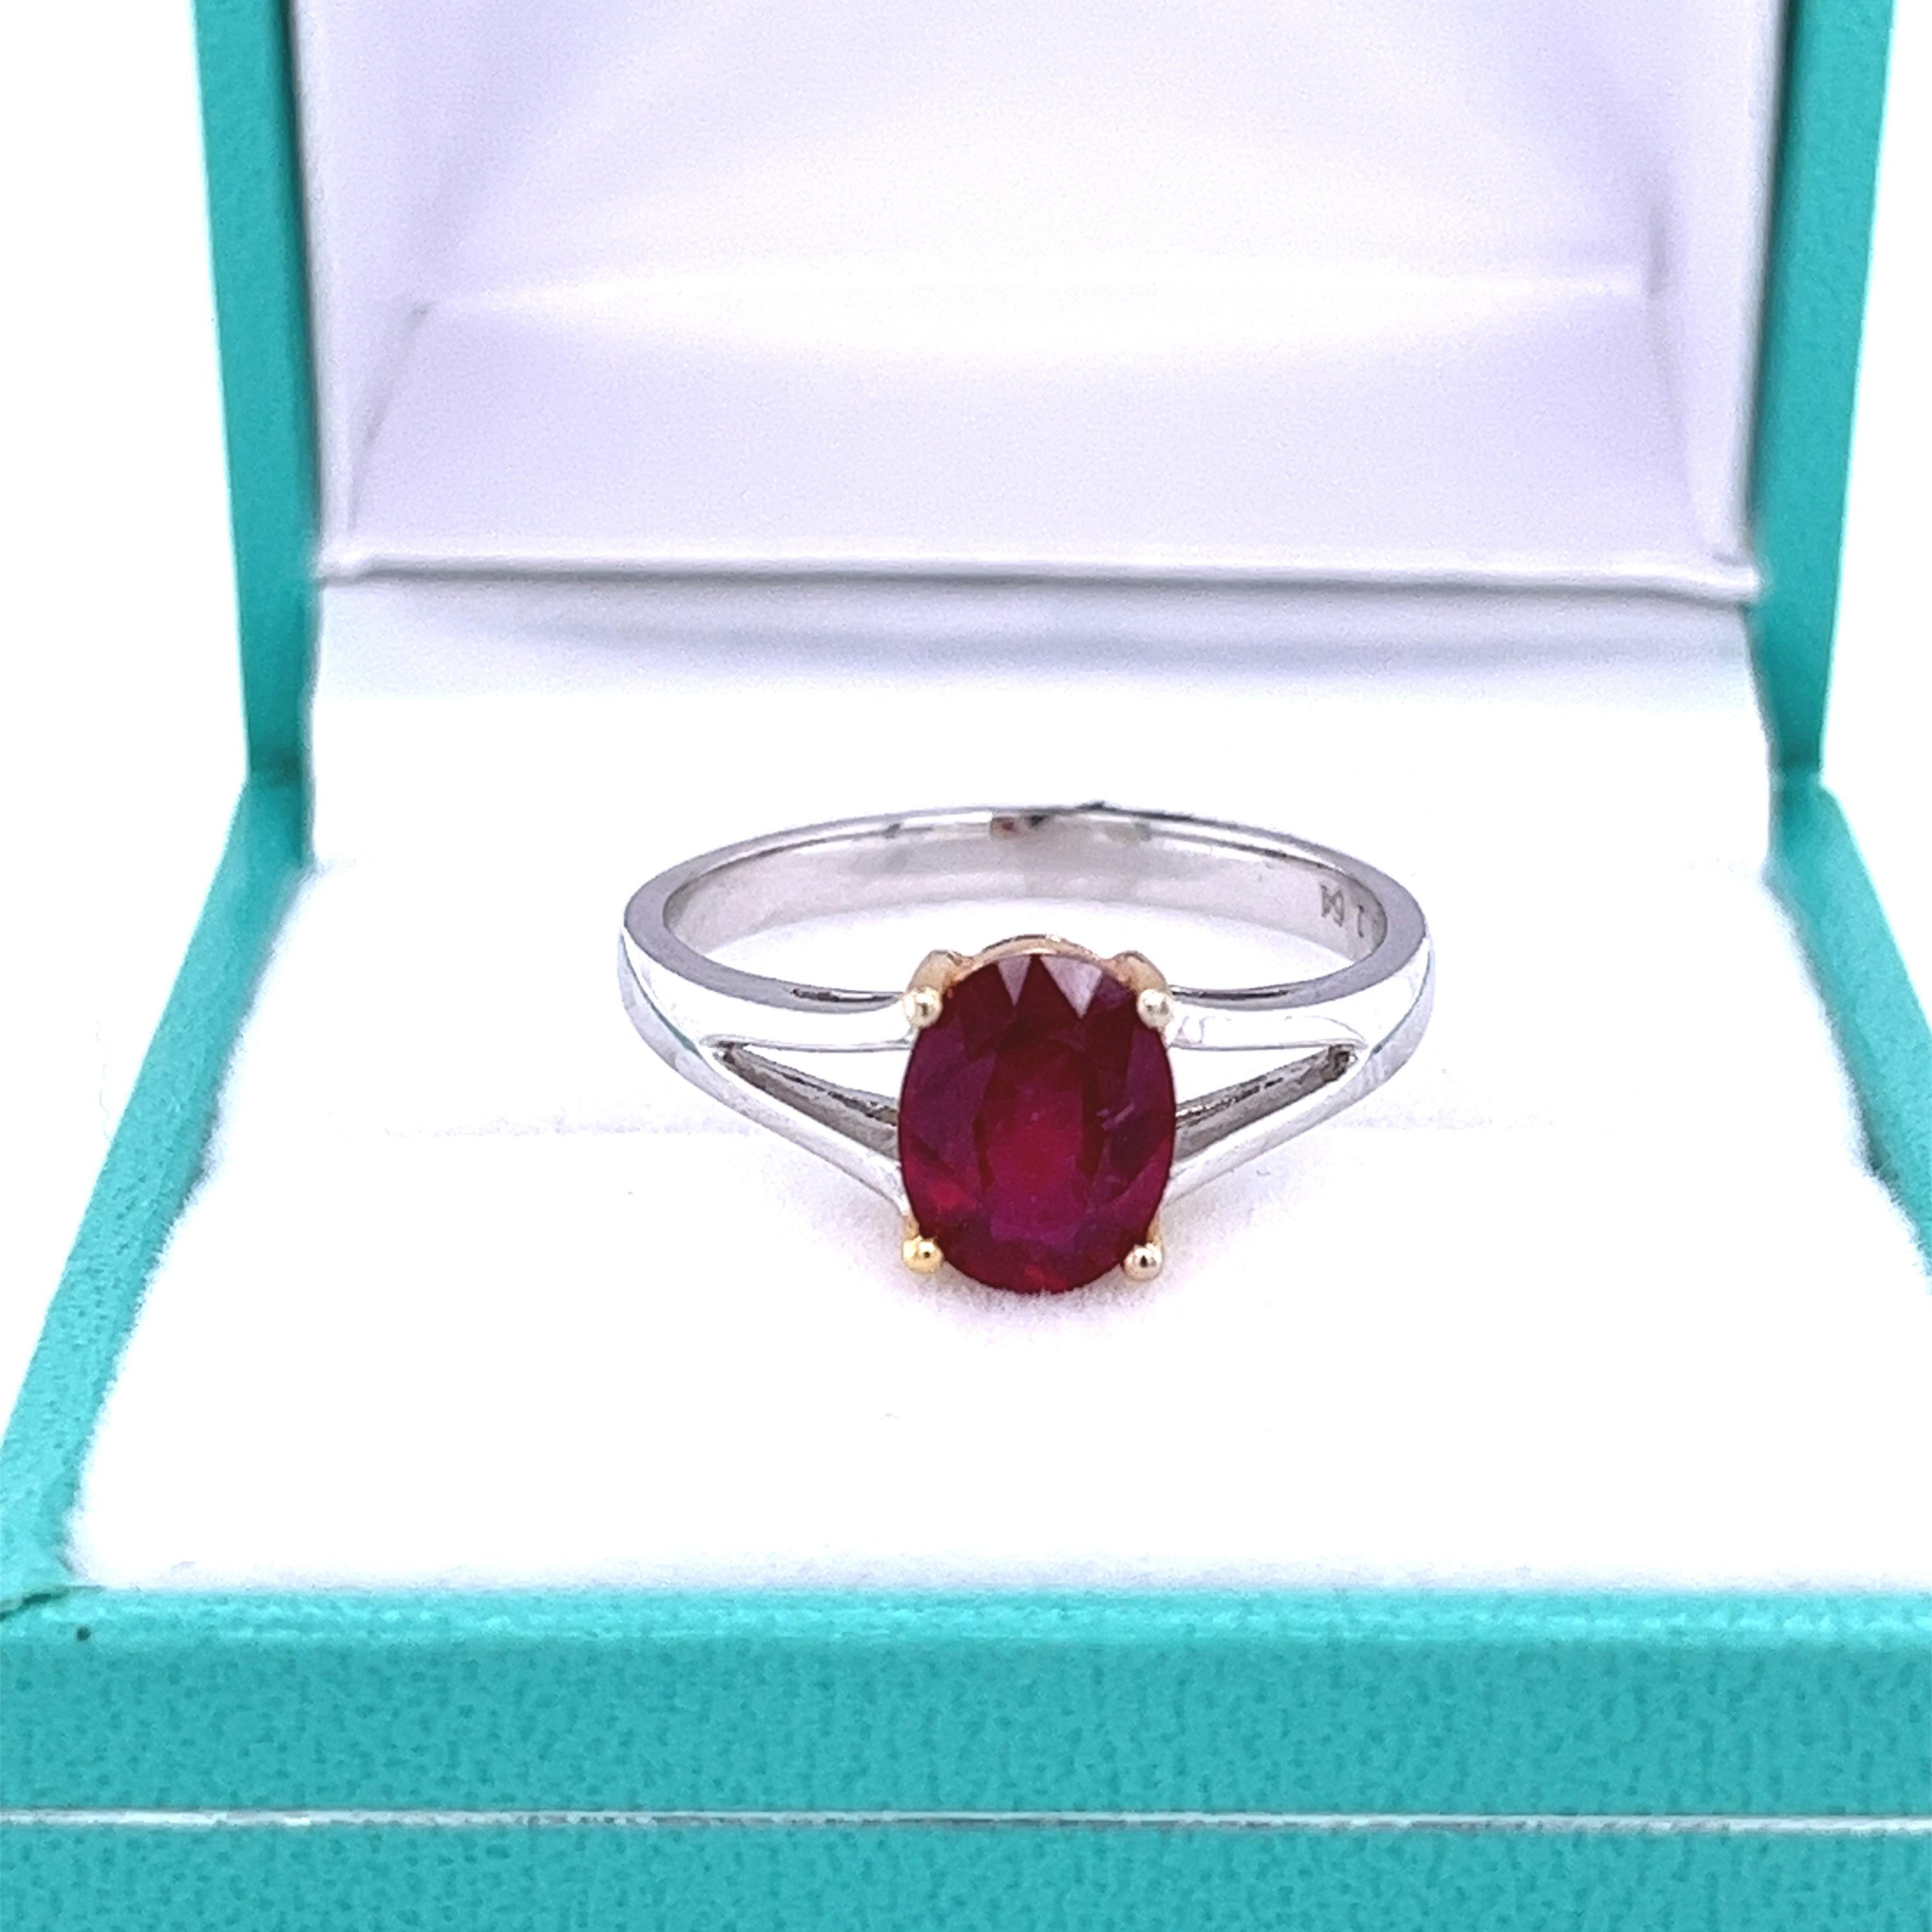 Natural 1.64 carat ruby set in 14 karat solid white and yellow gold ring. Hypoallergenic and waterproof. Ideal for daily wear.

Ring Details:
✔ Metal: 14K
✔ Weight: 2.7 grams
✔ Band Width: 2.5 mm
✔ Ring Size: 7 U.S. (adjustable)

Ruby Details:
✔